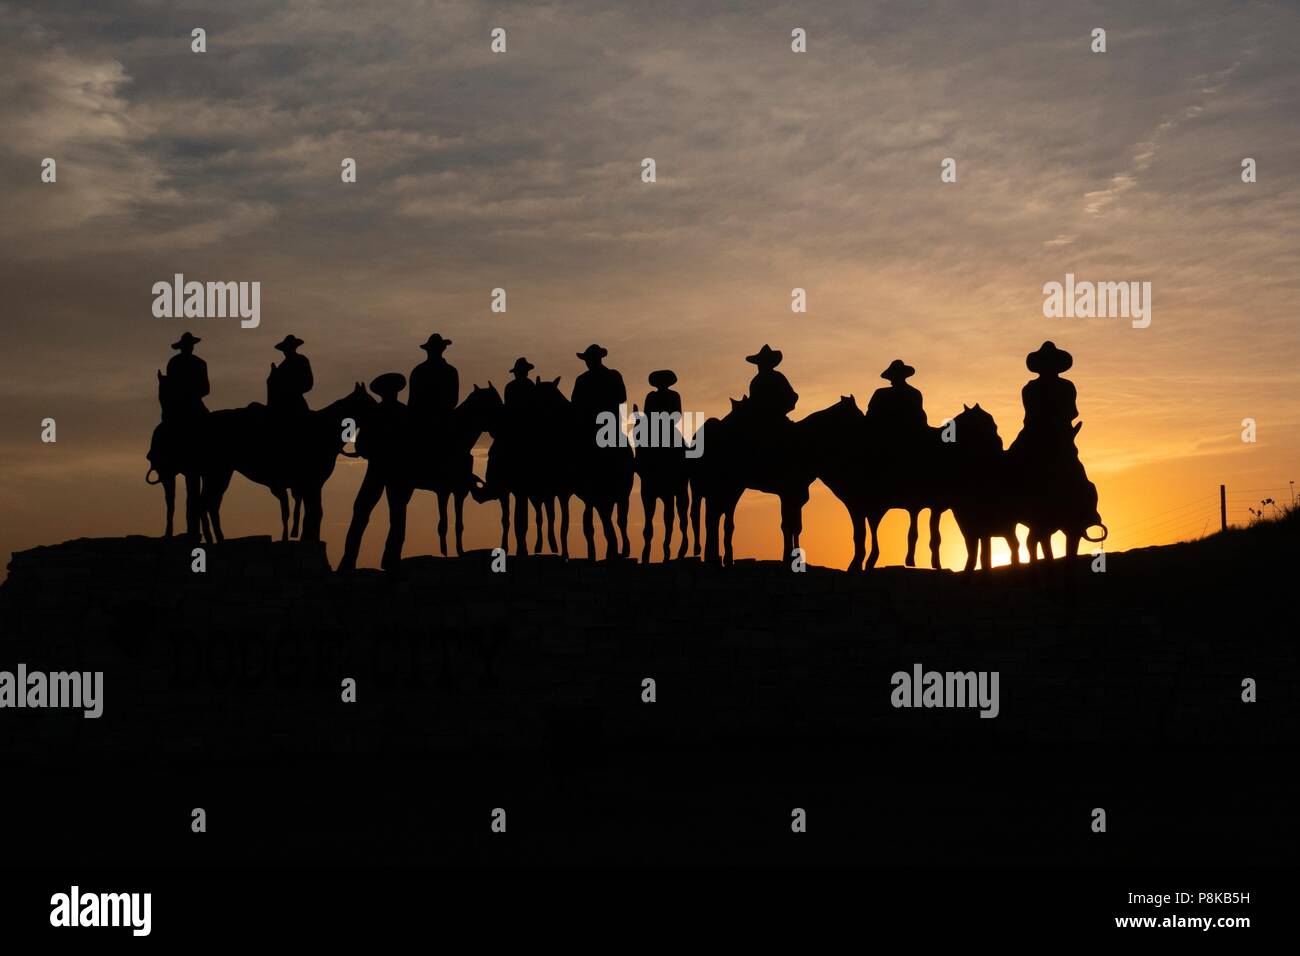 silhouette sculpture of cowboys on horseback  at sunset in Dodge city, Kansas Stock Photo